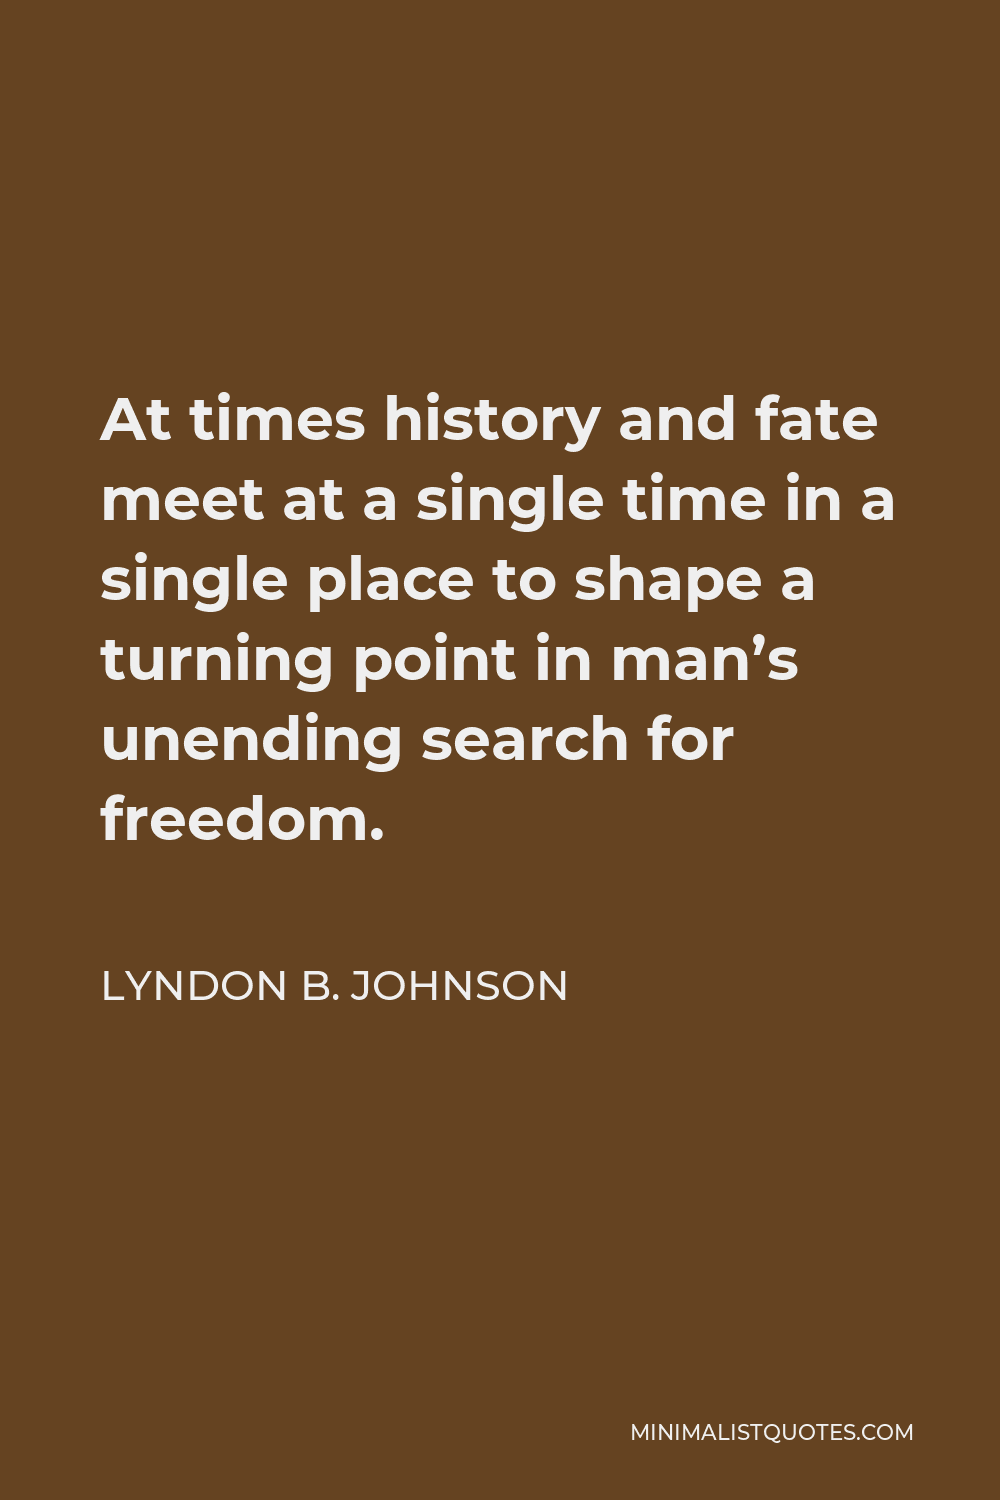 Lyndon B. Johnson Quote - At times history and fate meet at a single time in a single place to shape a turning point in man’s unending search for freedom.